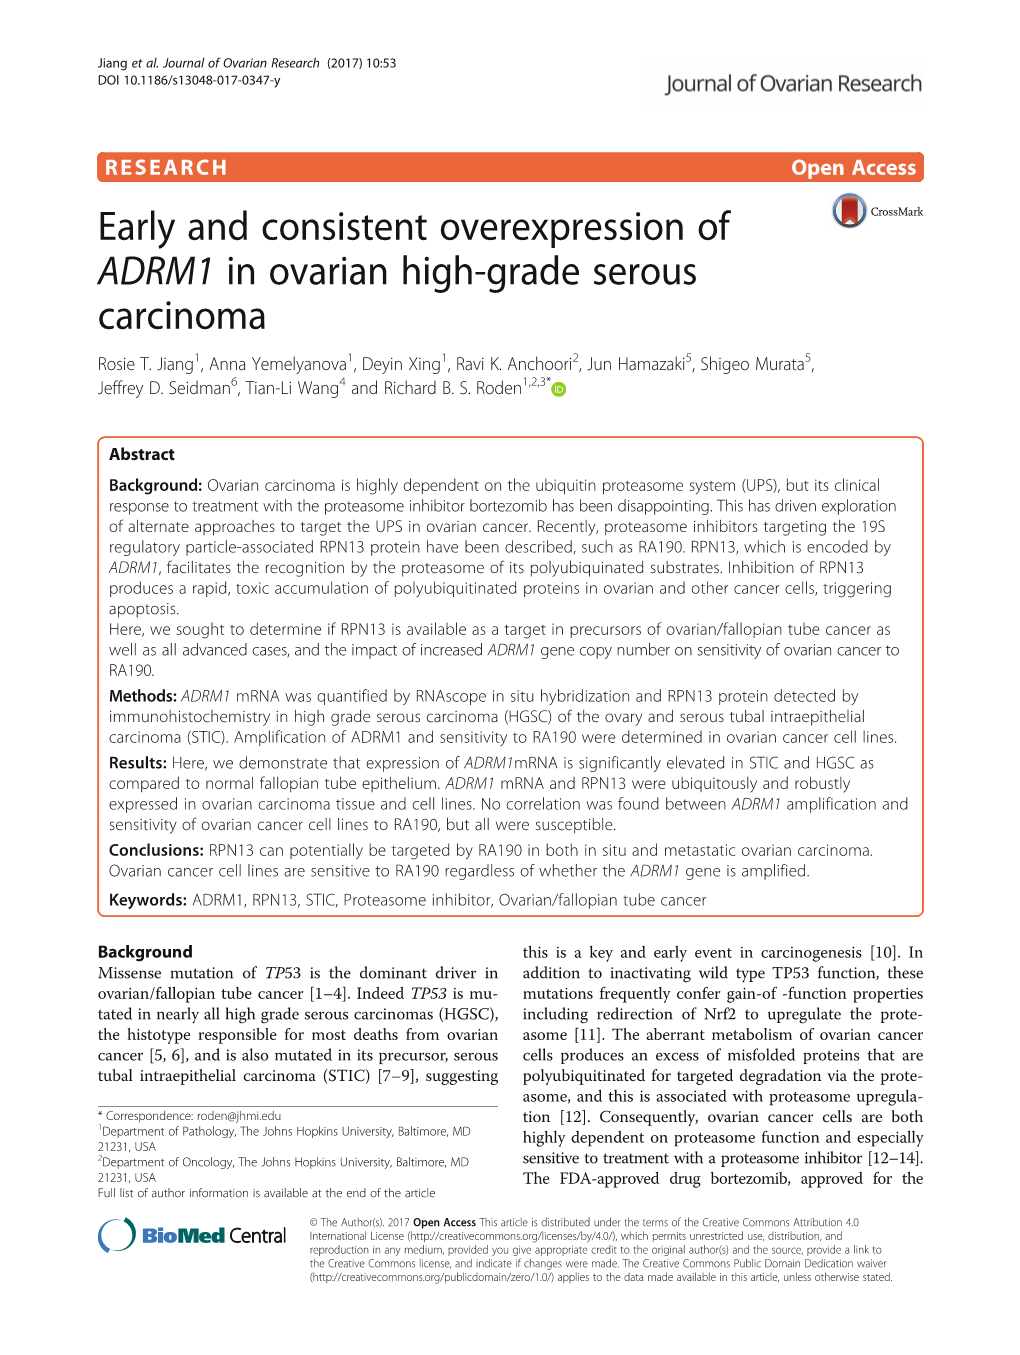 Early and Consistent Overexpression of ADRM1 in Ovarian High-Grade Serous Carcinoma Rosie T